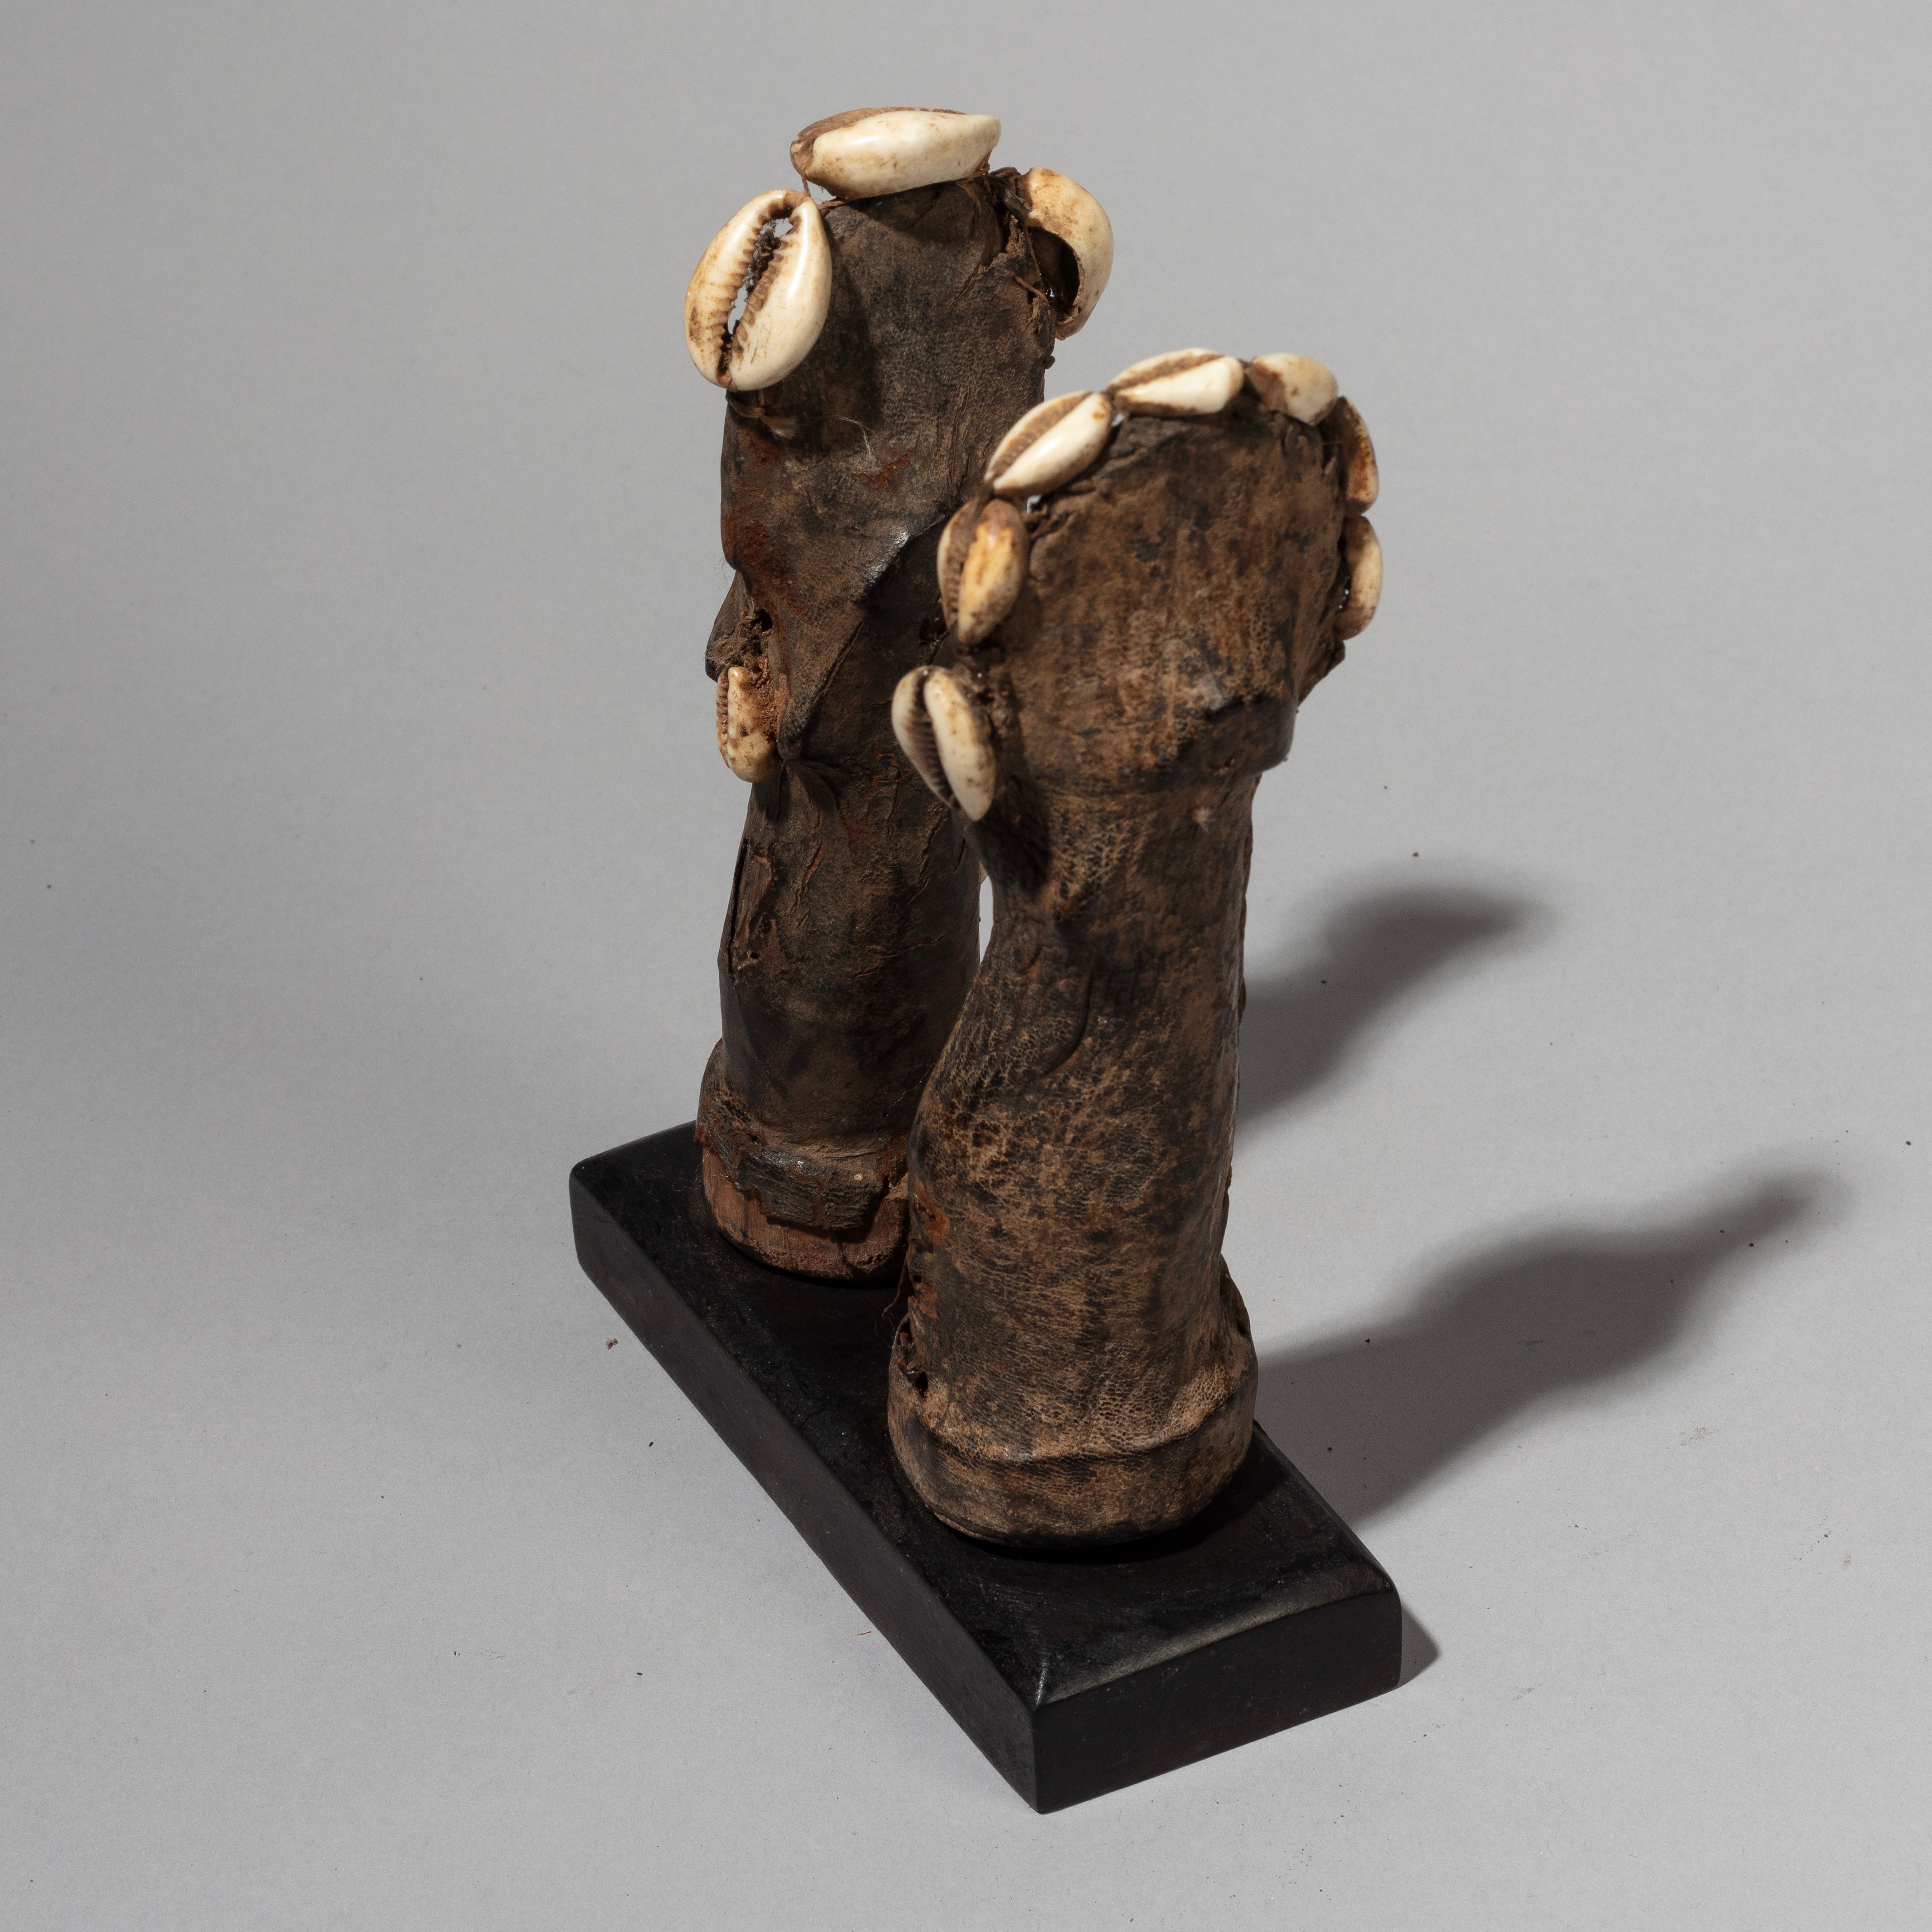 A PAIR OF LEATHER COVERED DOLLS,  MOSSI TRIBE BURKINA FASO( No 2153)